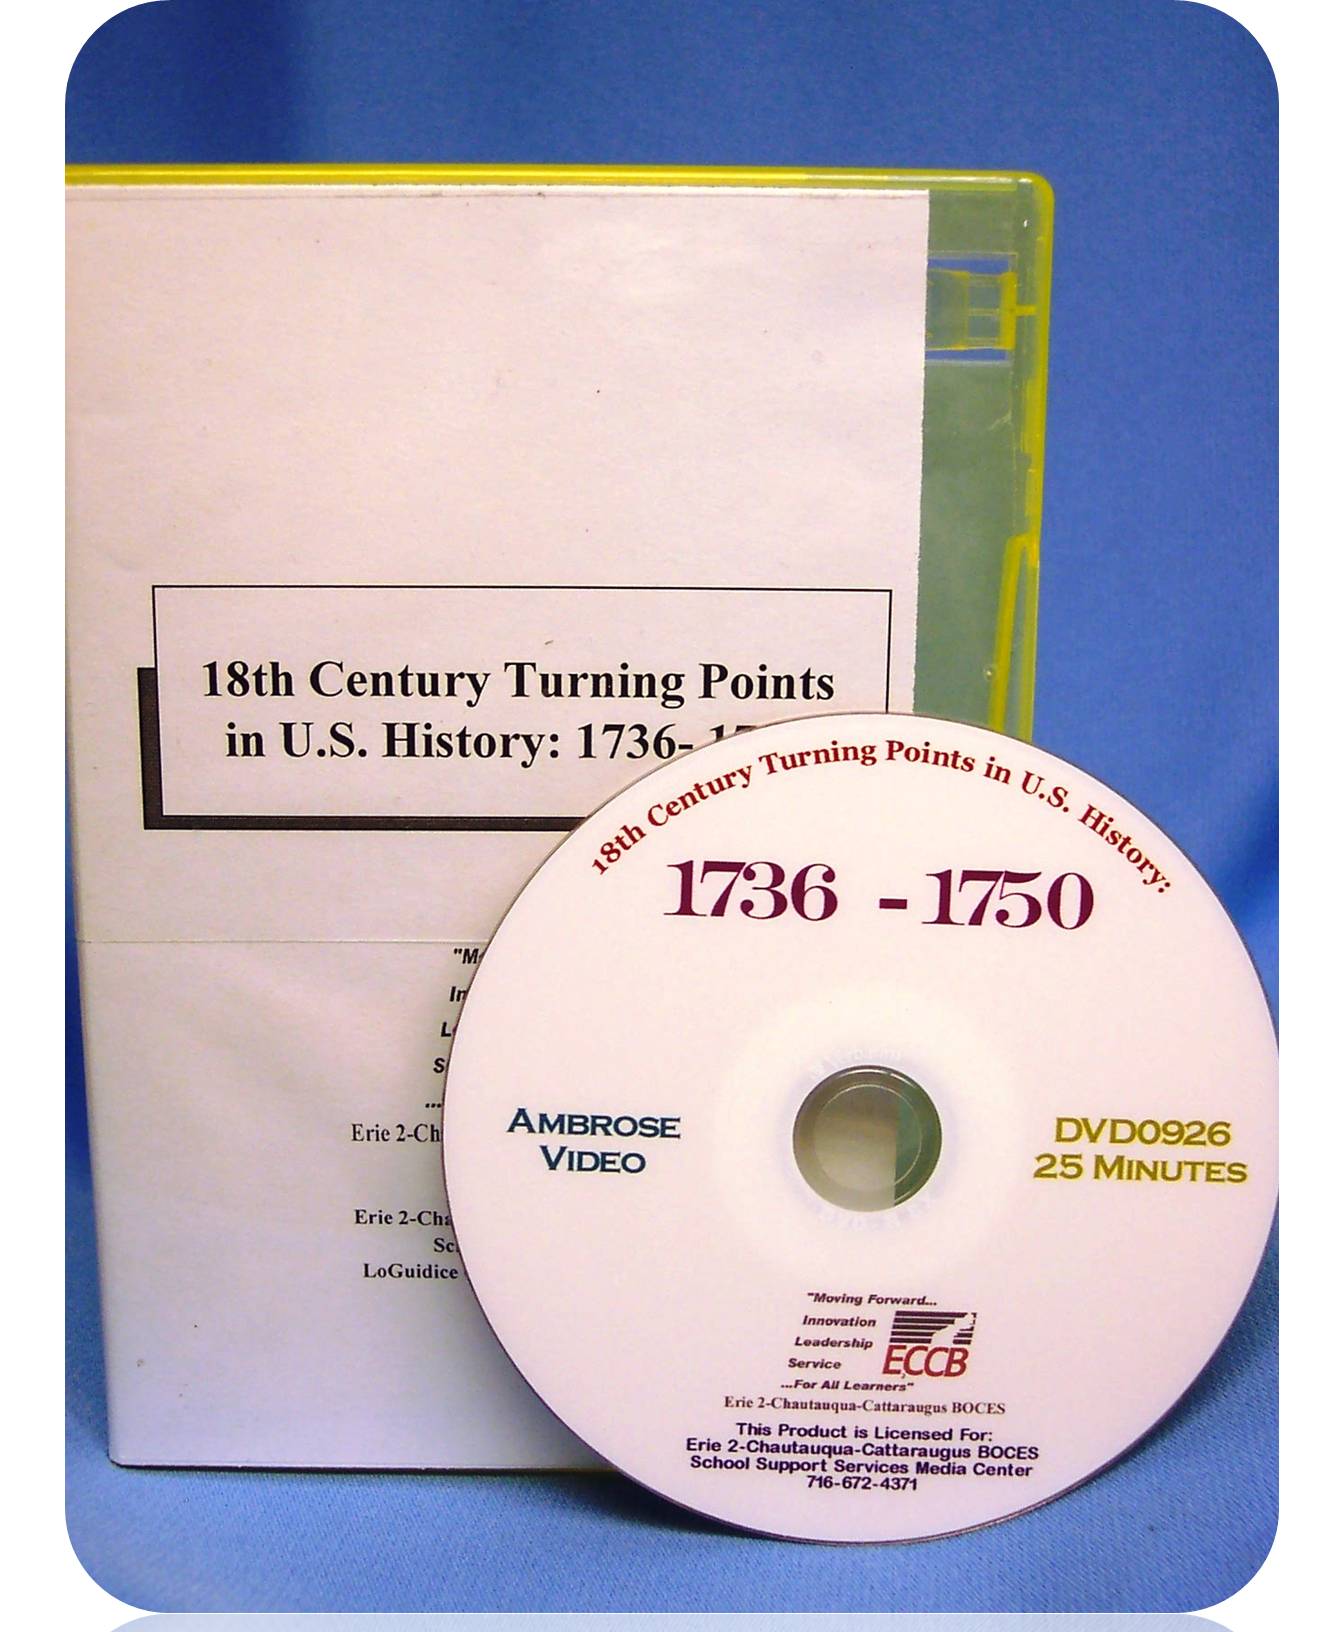 18th Century Turning Points in U.S. History: 1750- 1766